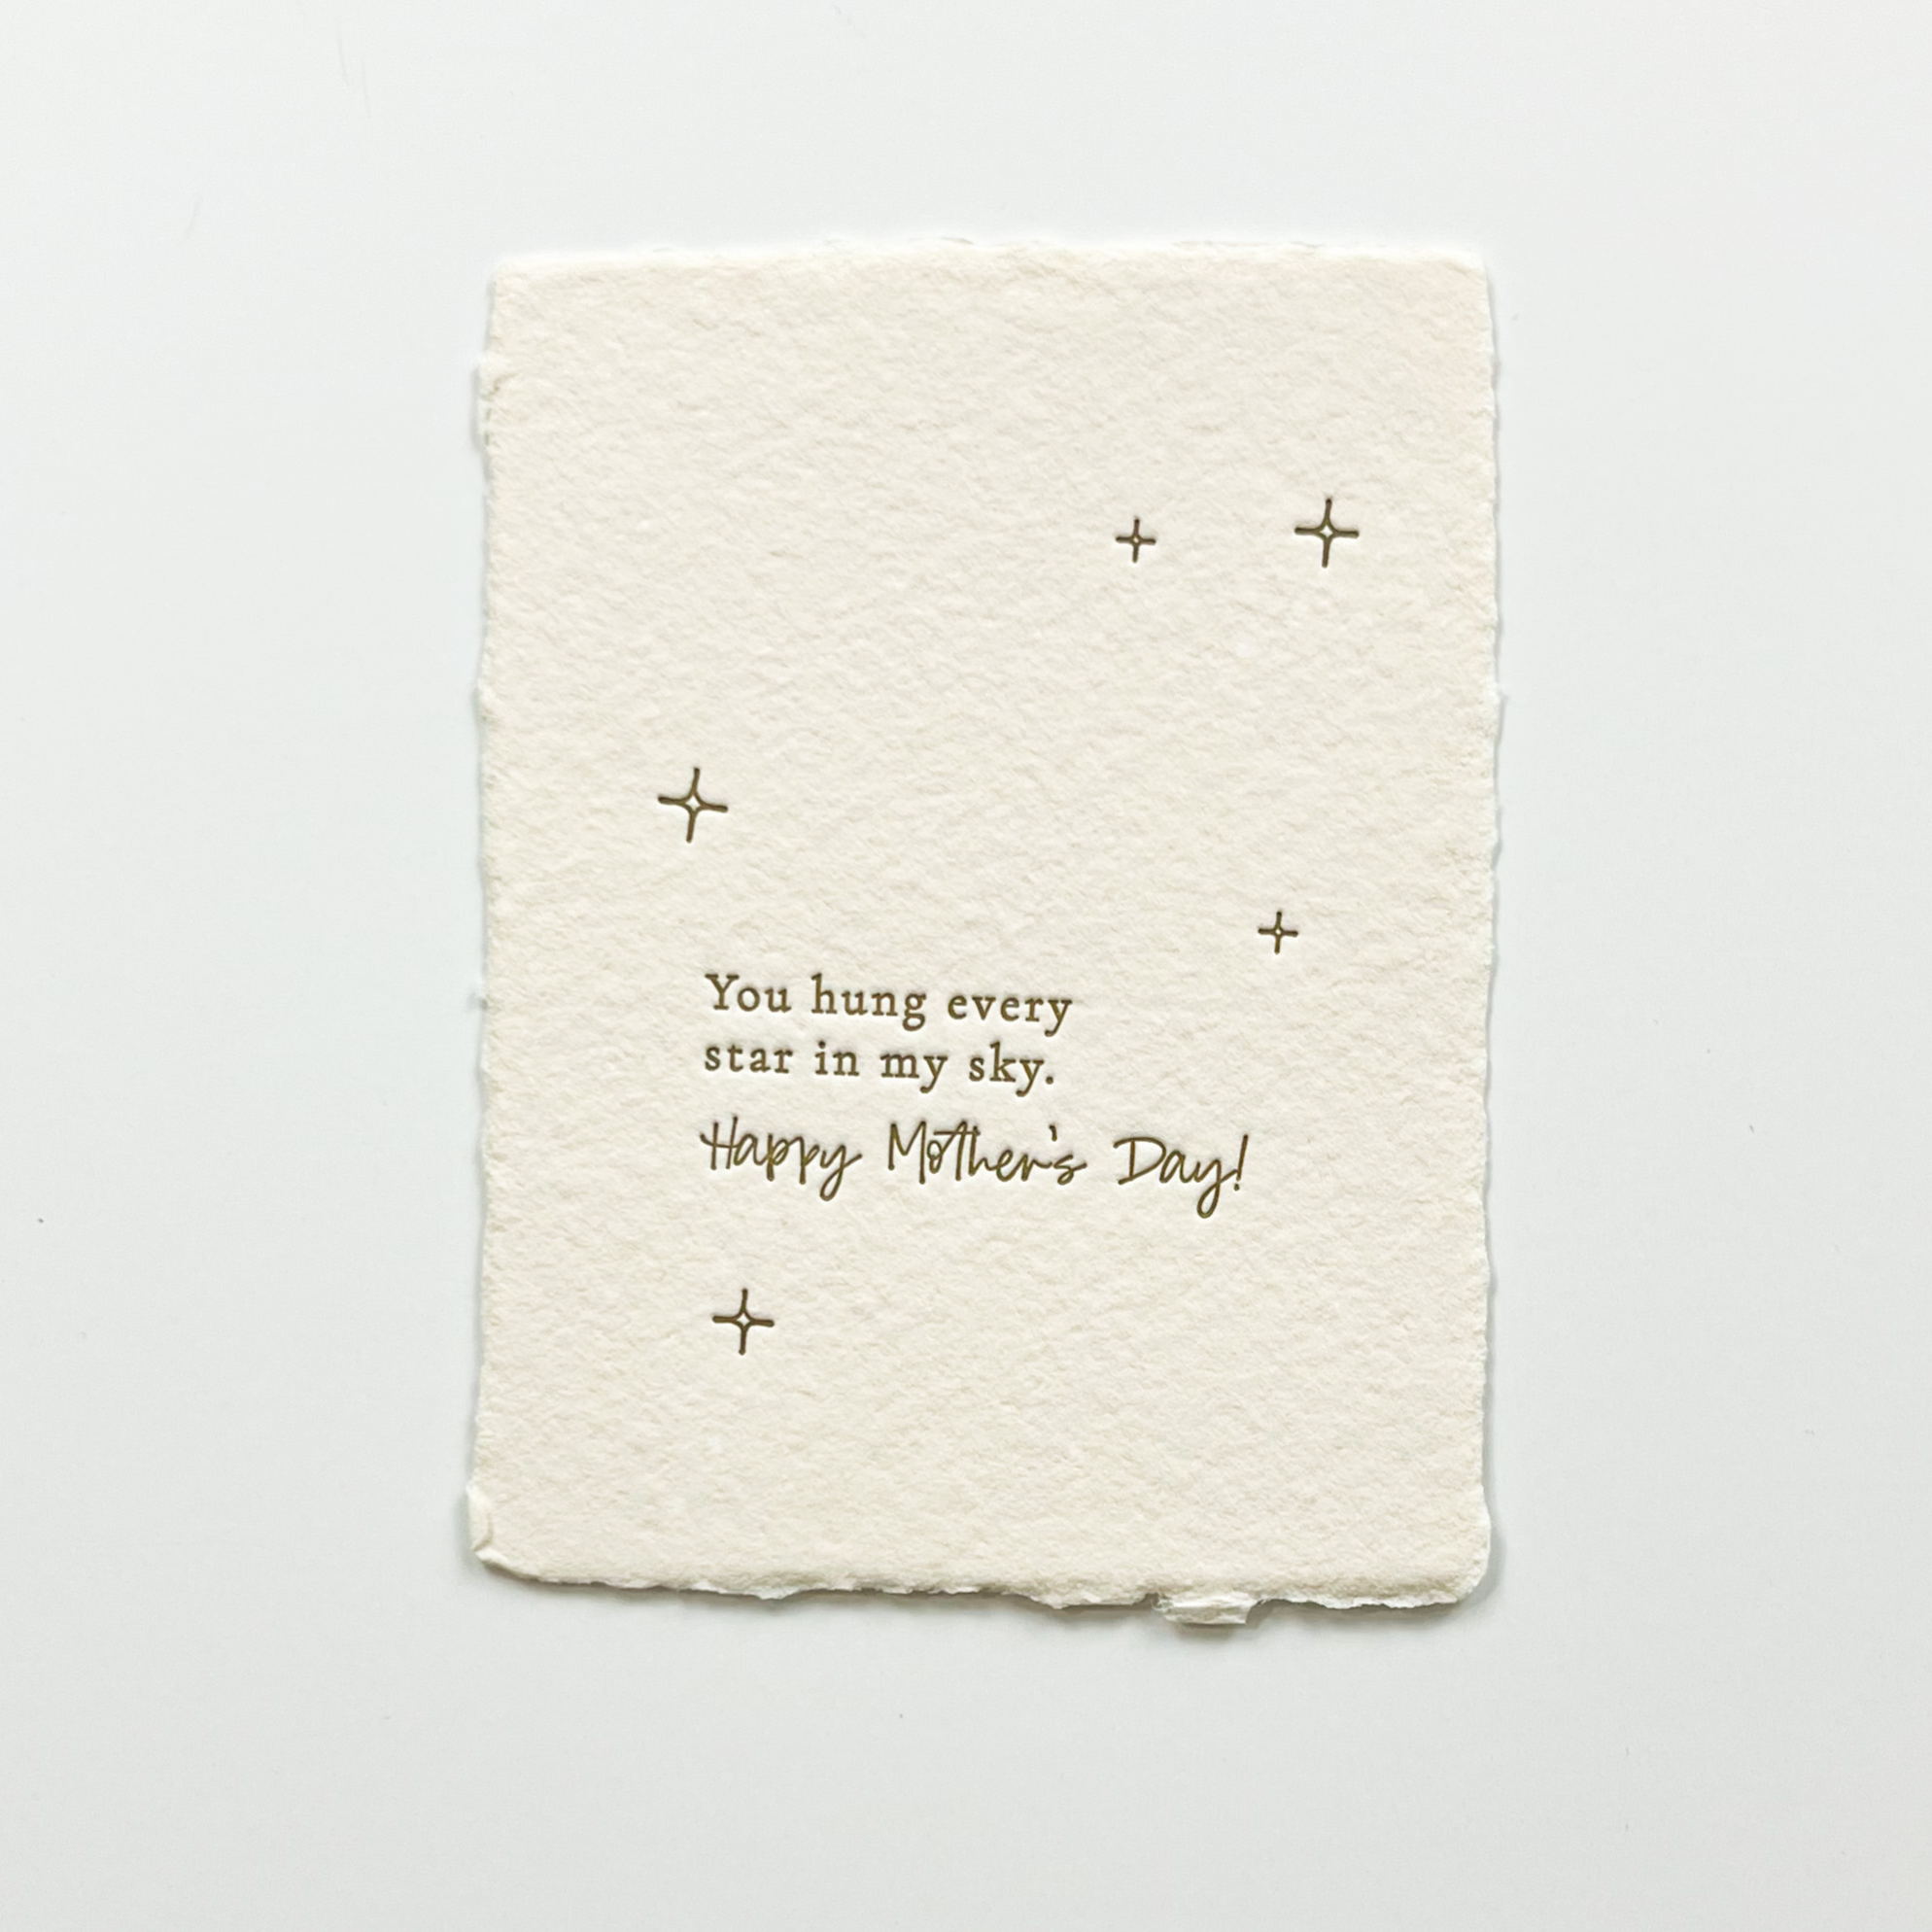 "You hung every star in my sky" Mother's Day Greeting Card